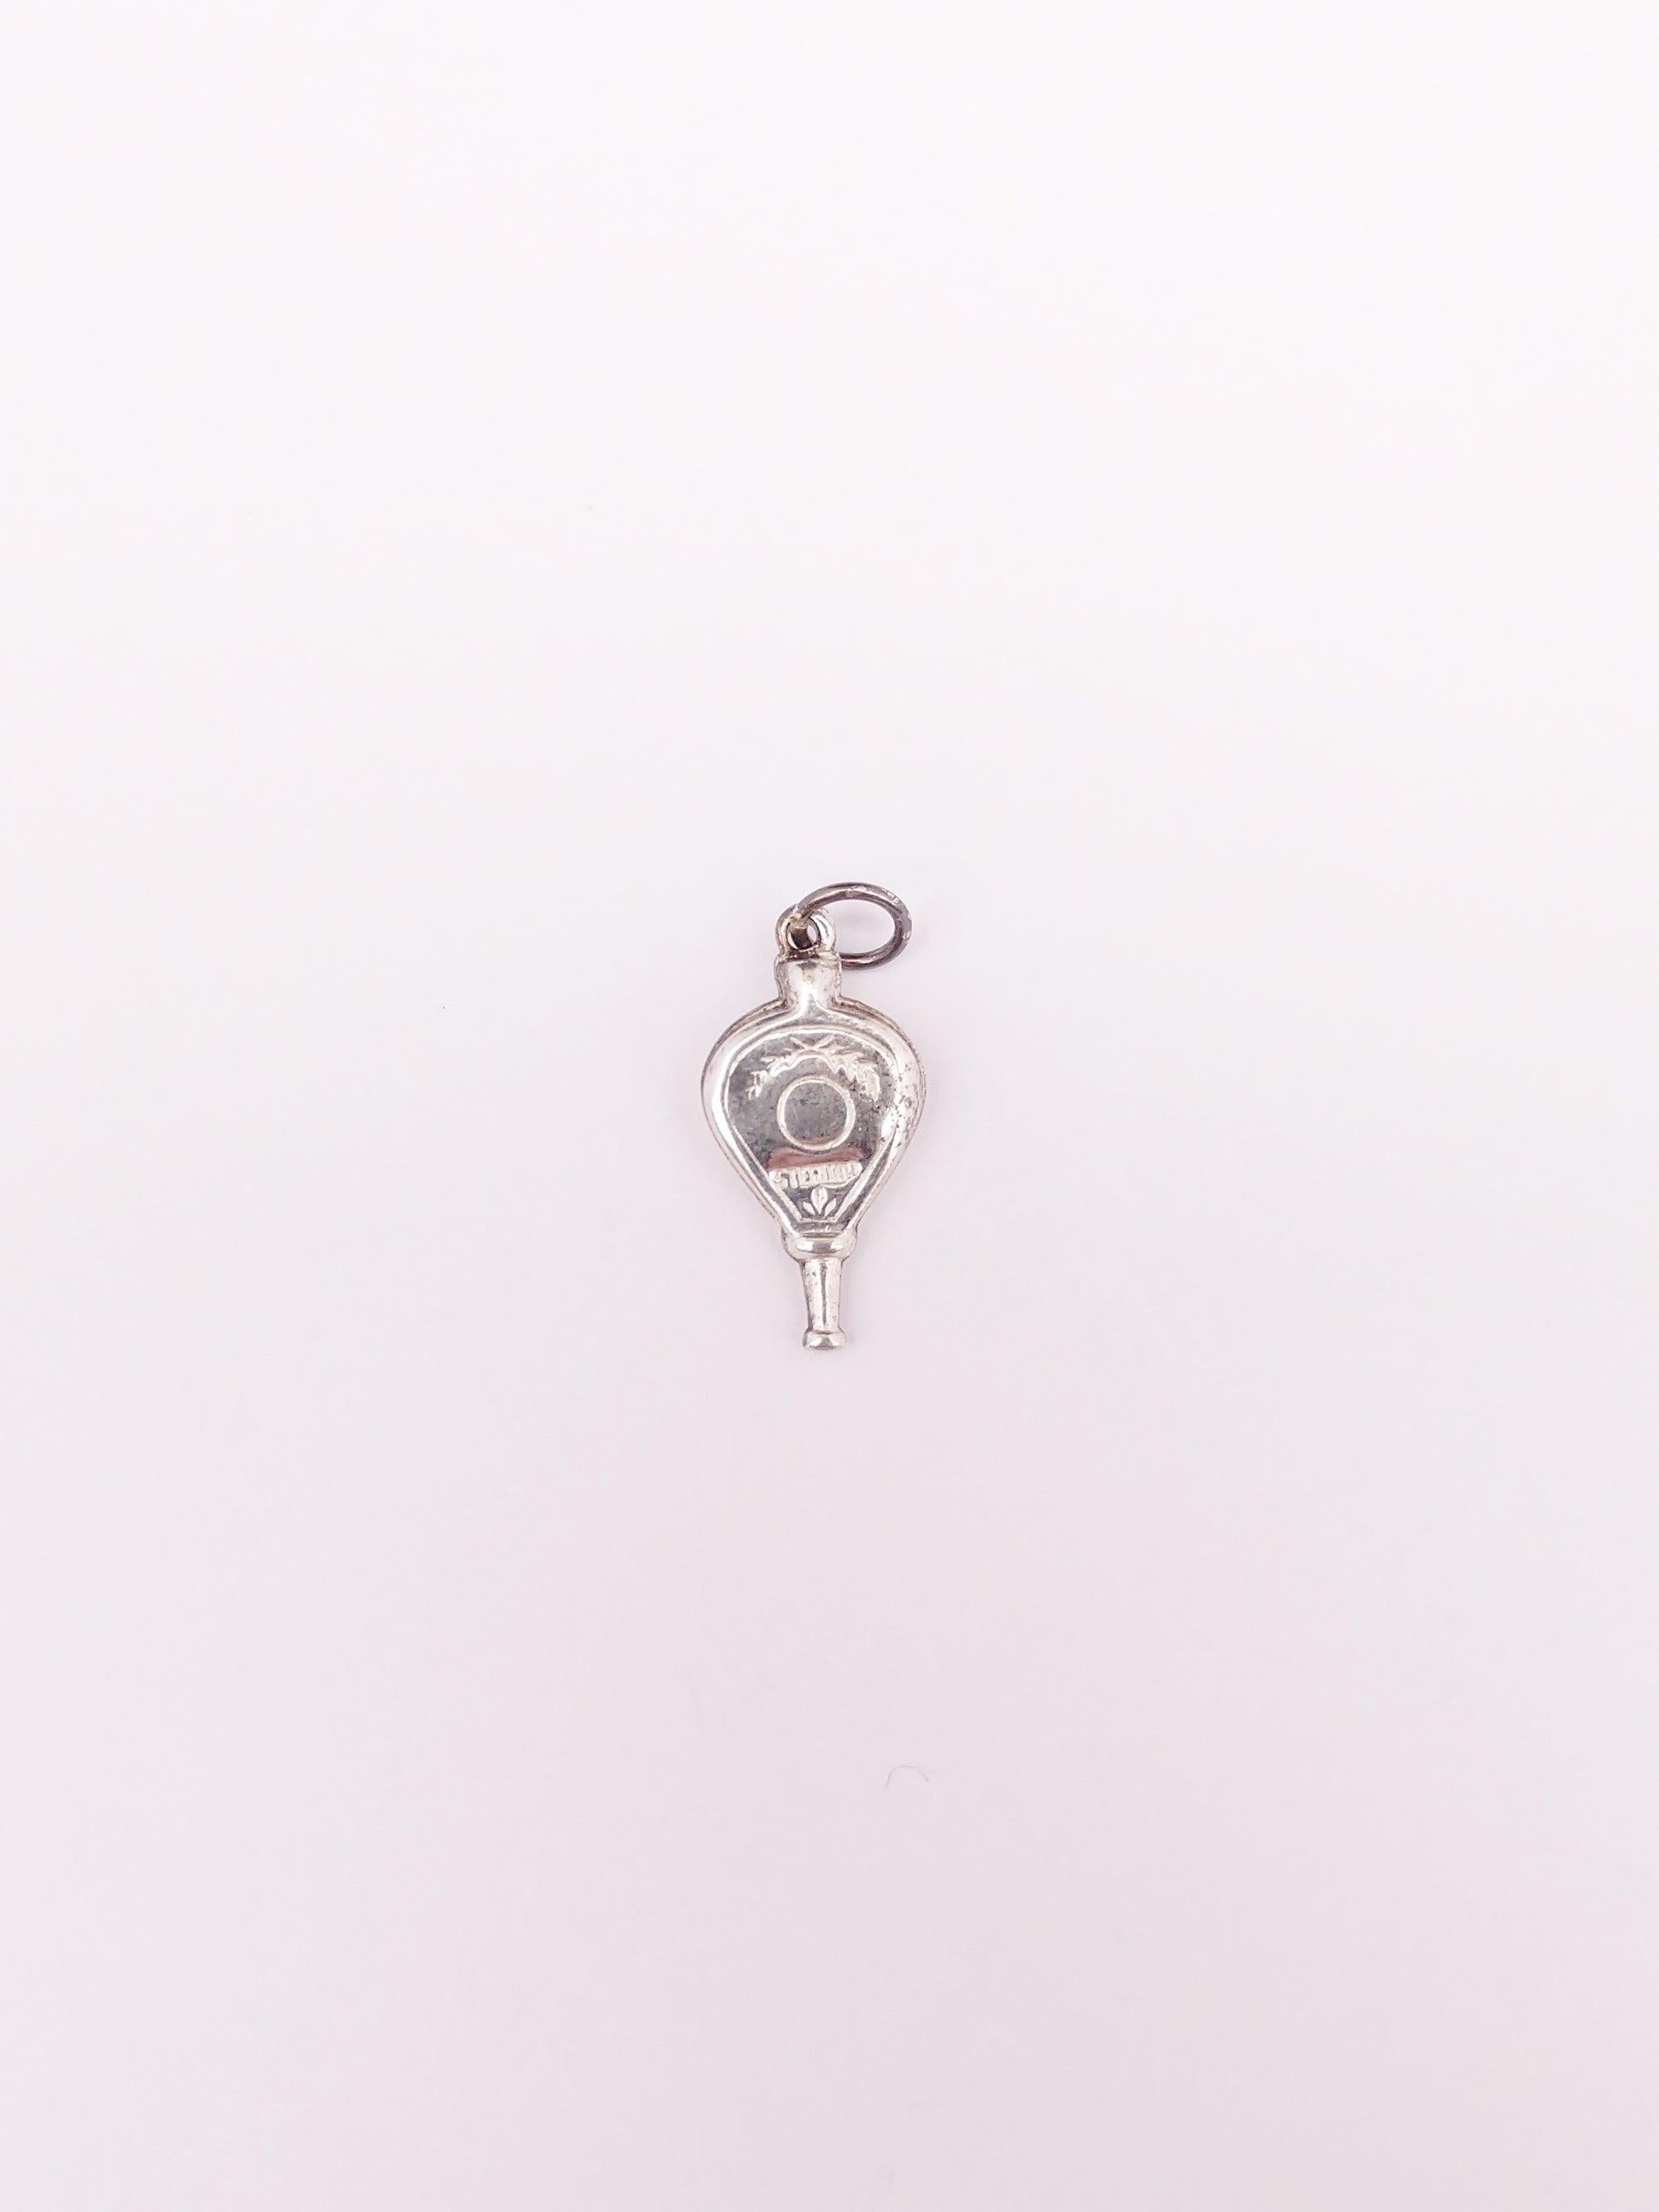 Vintage Fire Bellow Sterling Silver Charm - Hers and His Treasures